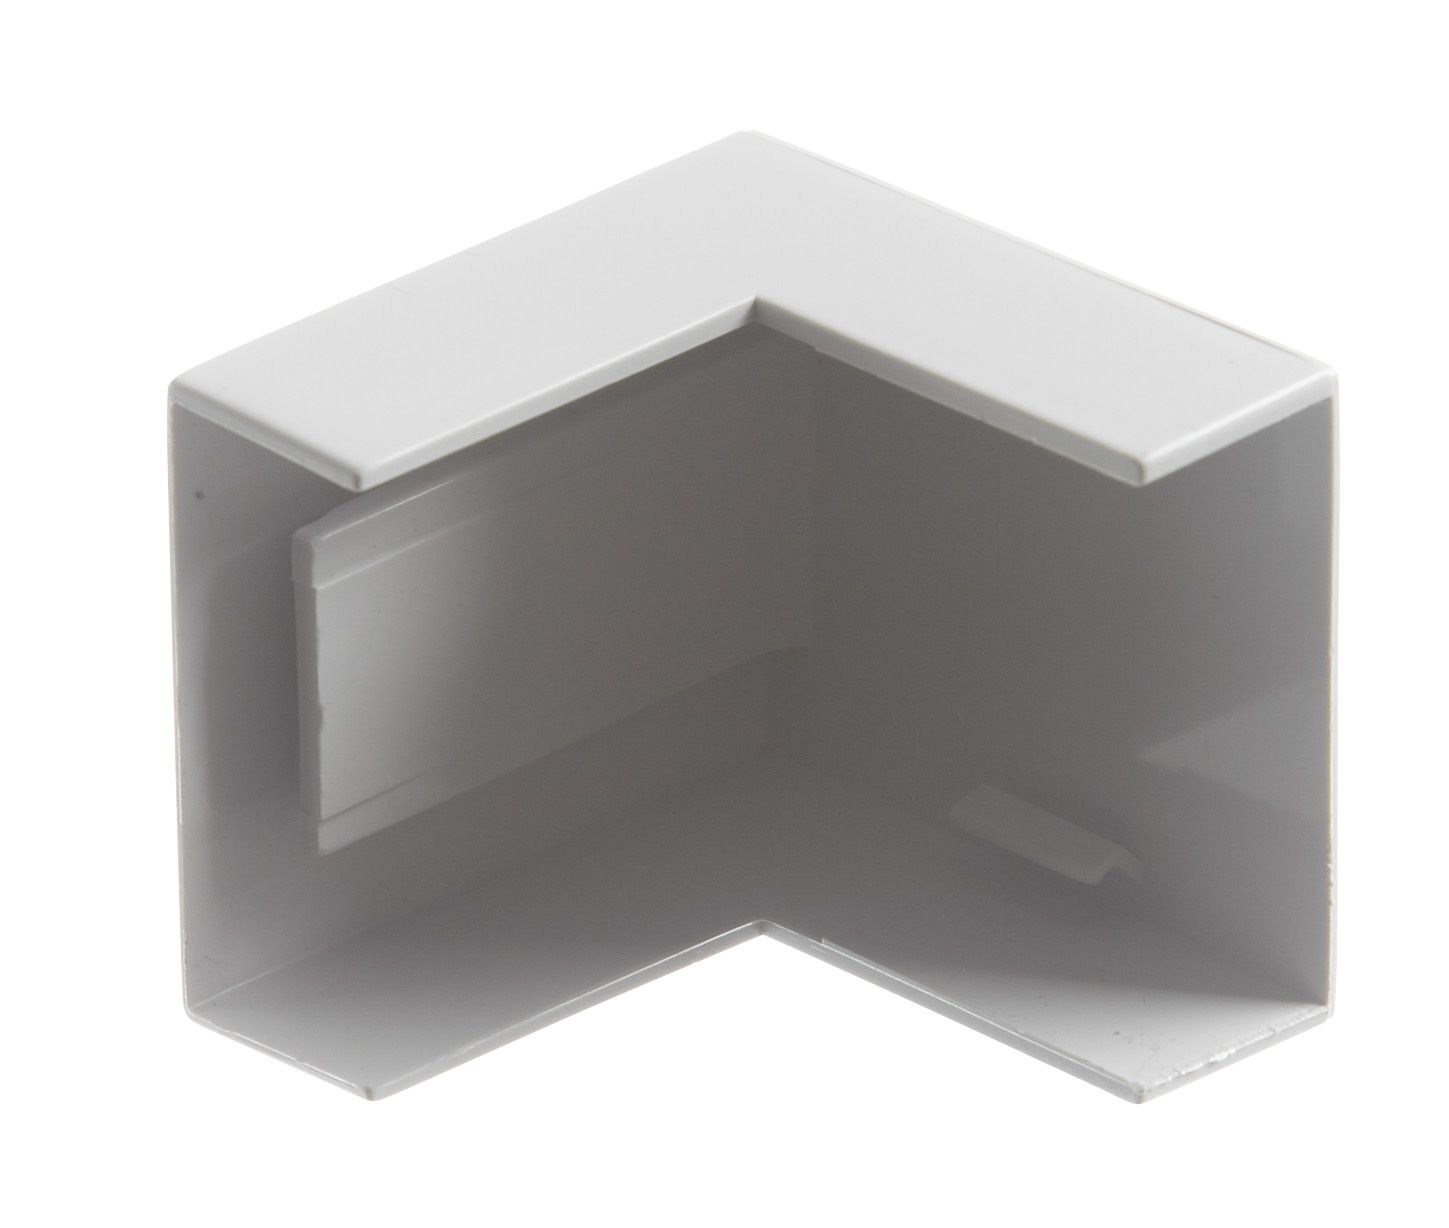 MK White 40mm x External 90° Angle joint